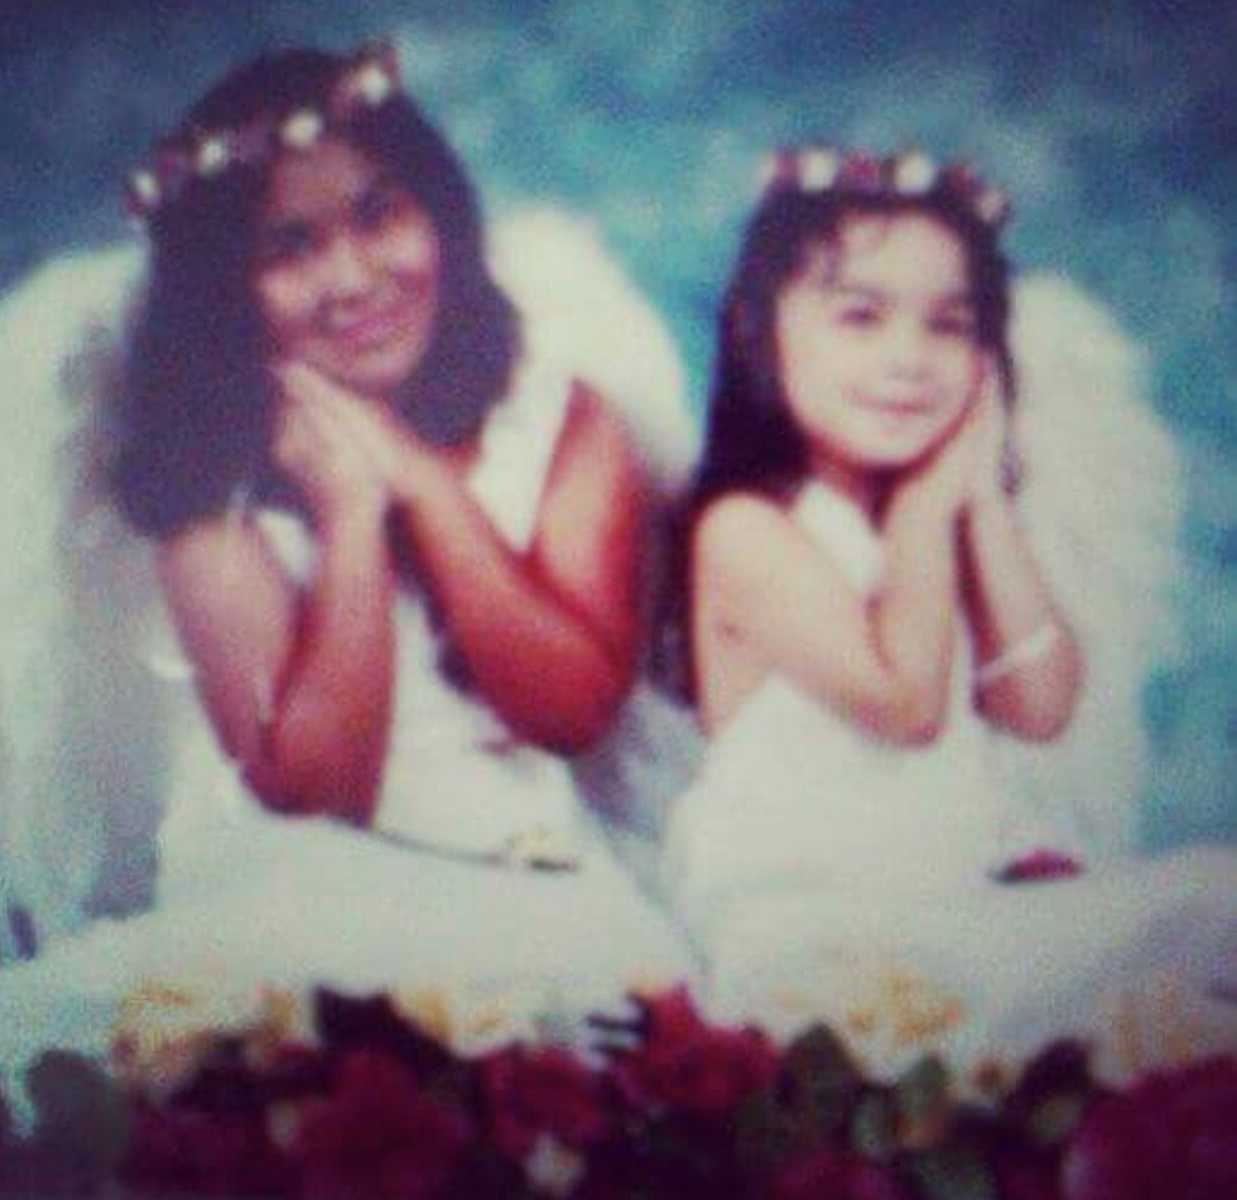 Deceased girl and younger sister pose in angel outfits